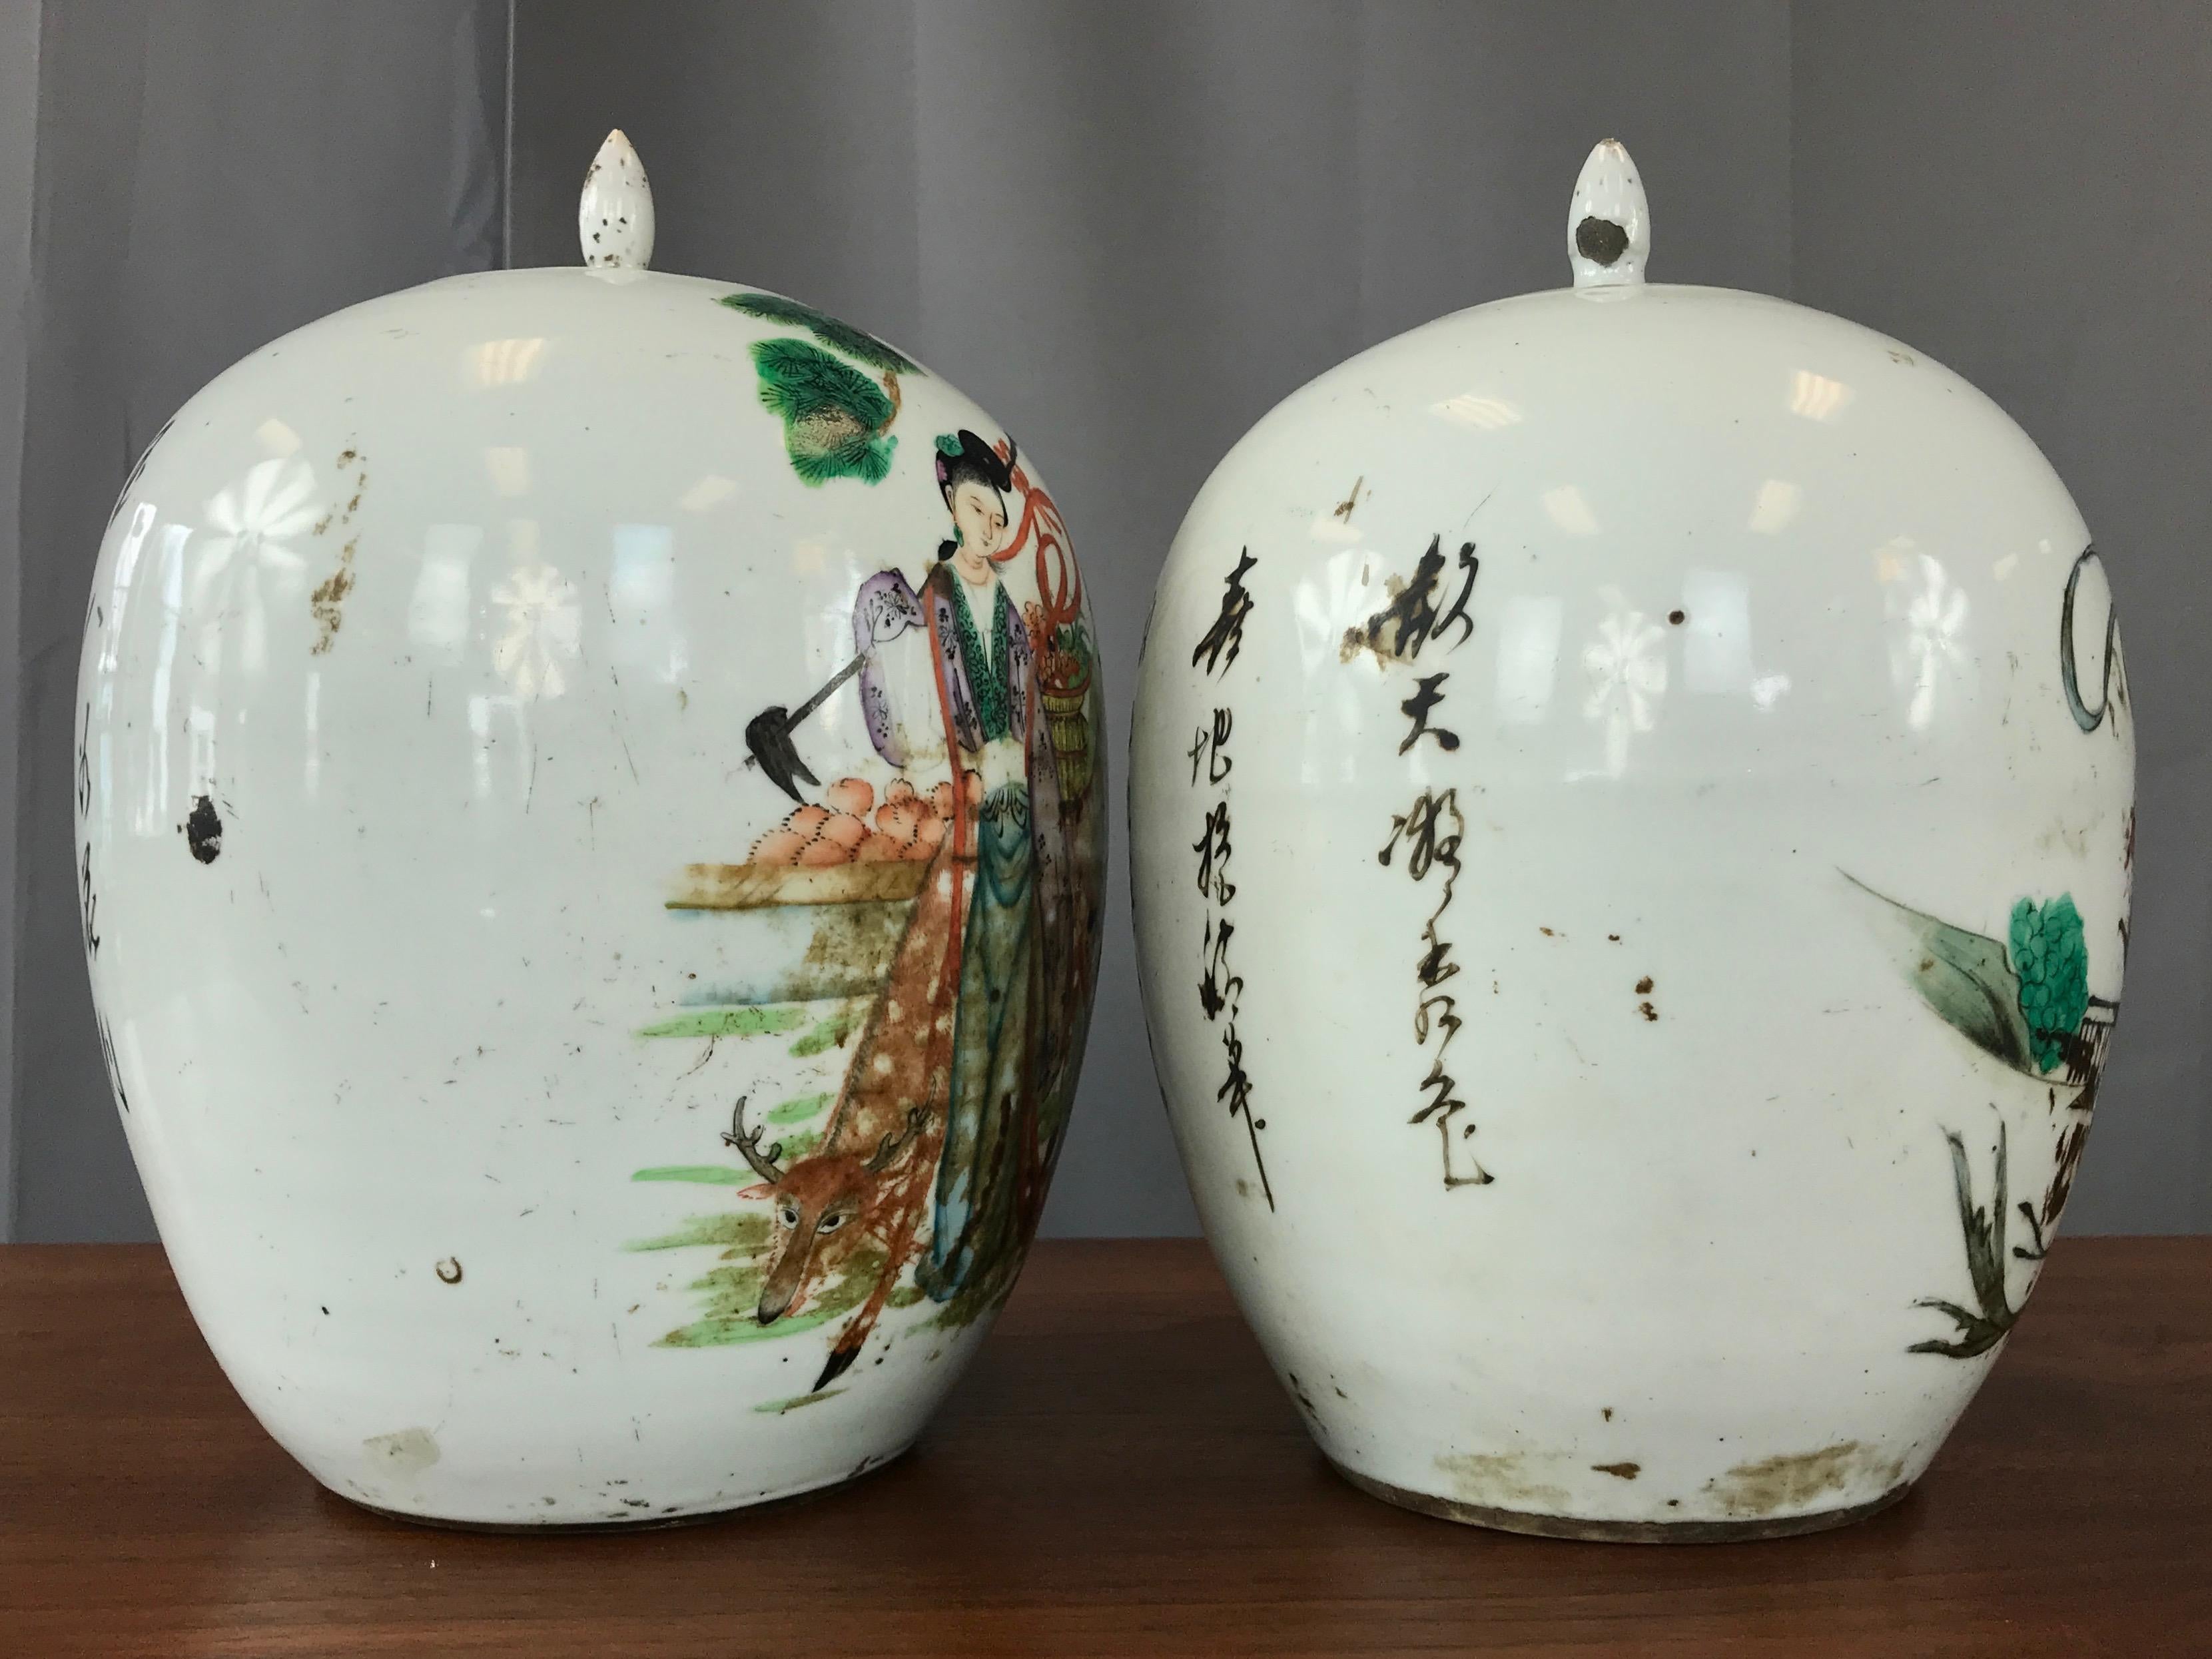 Chinoiserie Pair of Large Chinese Famille Verte Porcelain Covered Vases, Late Qing Period